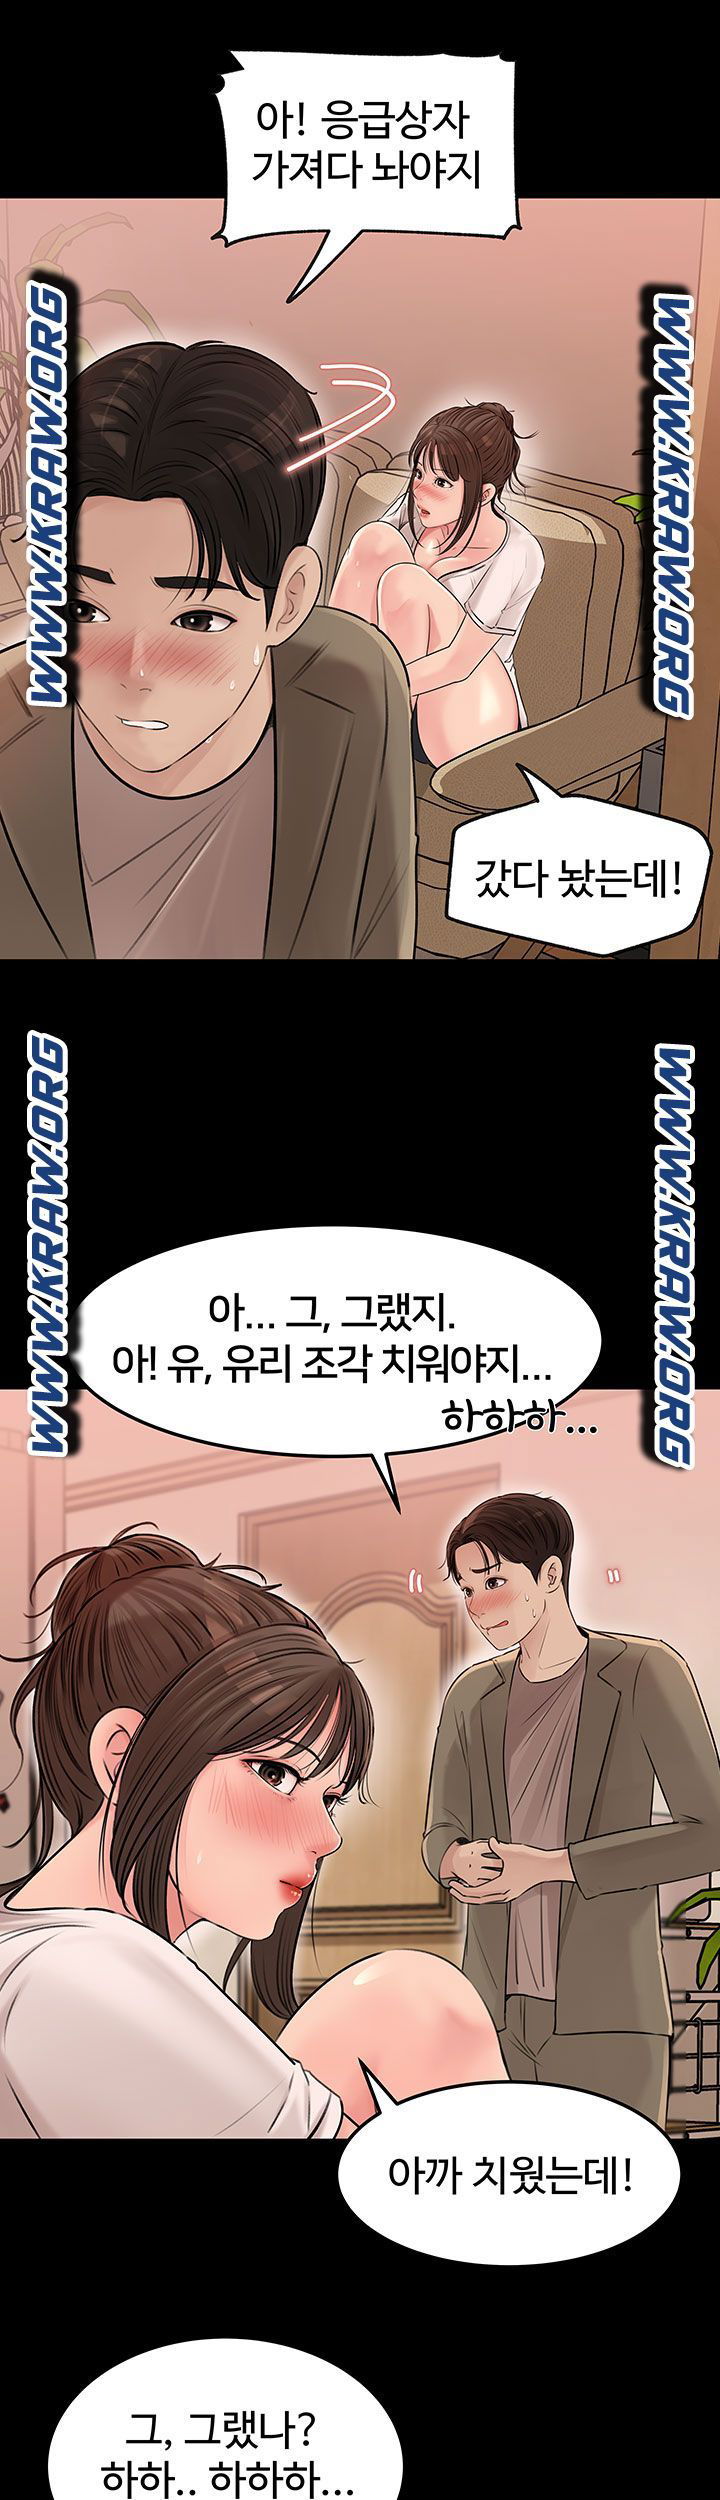 in-my-sister-in-law-raw-chap-4-28